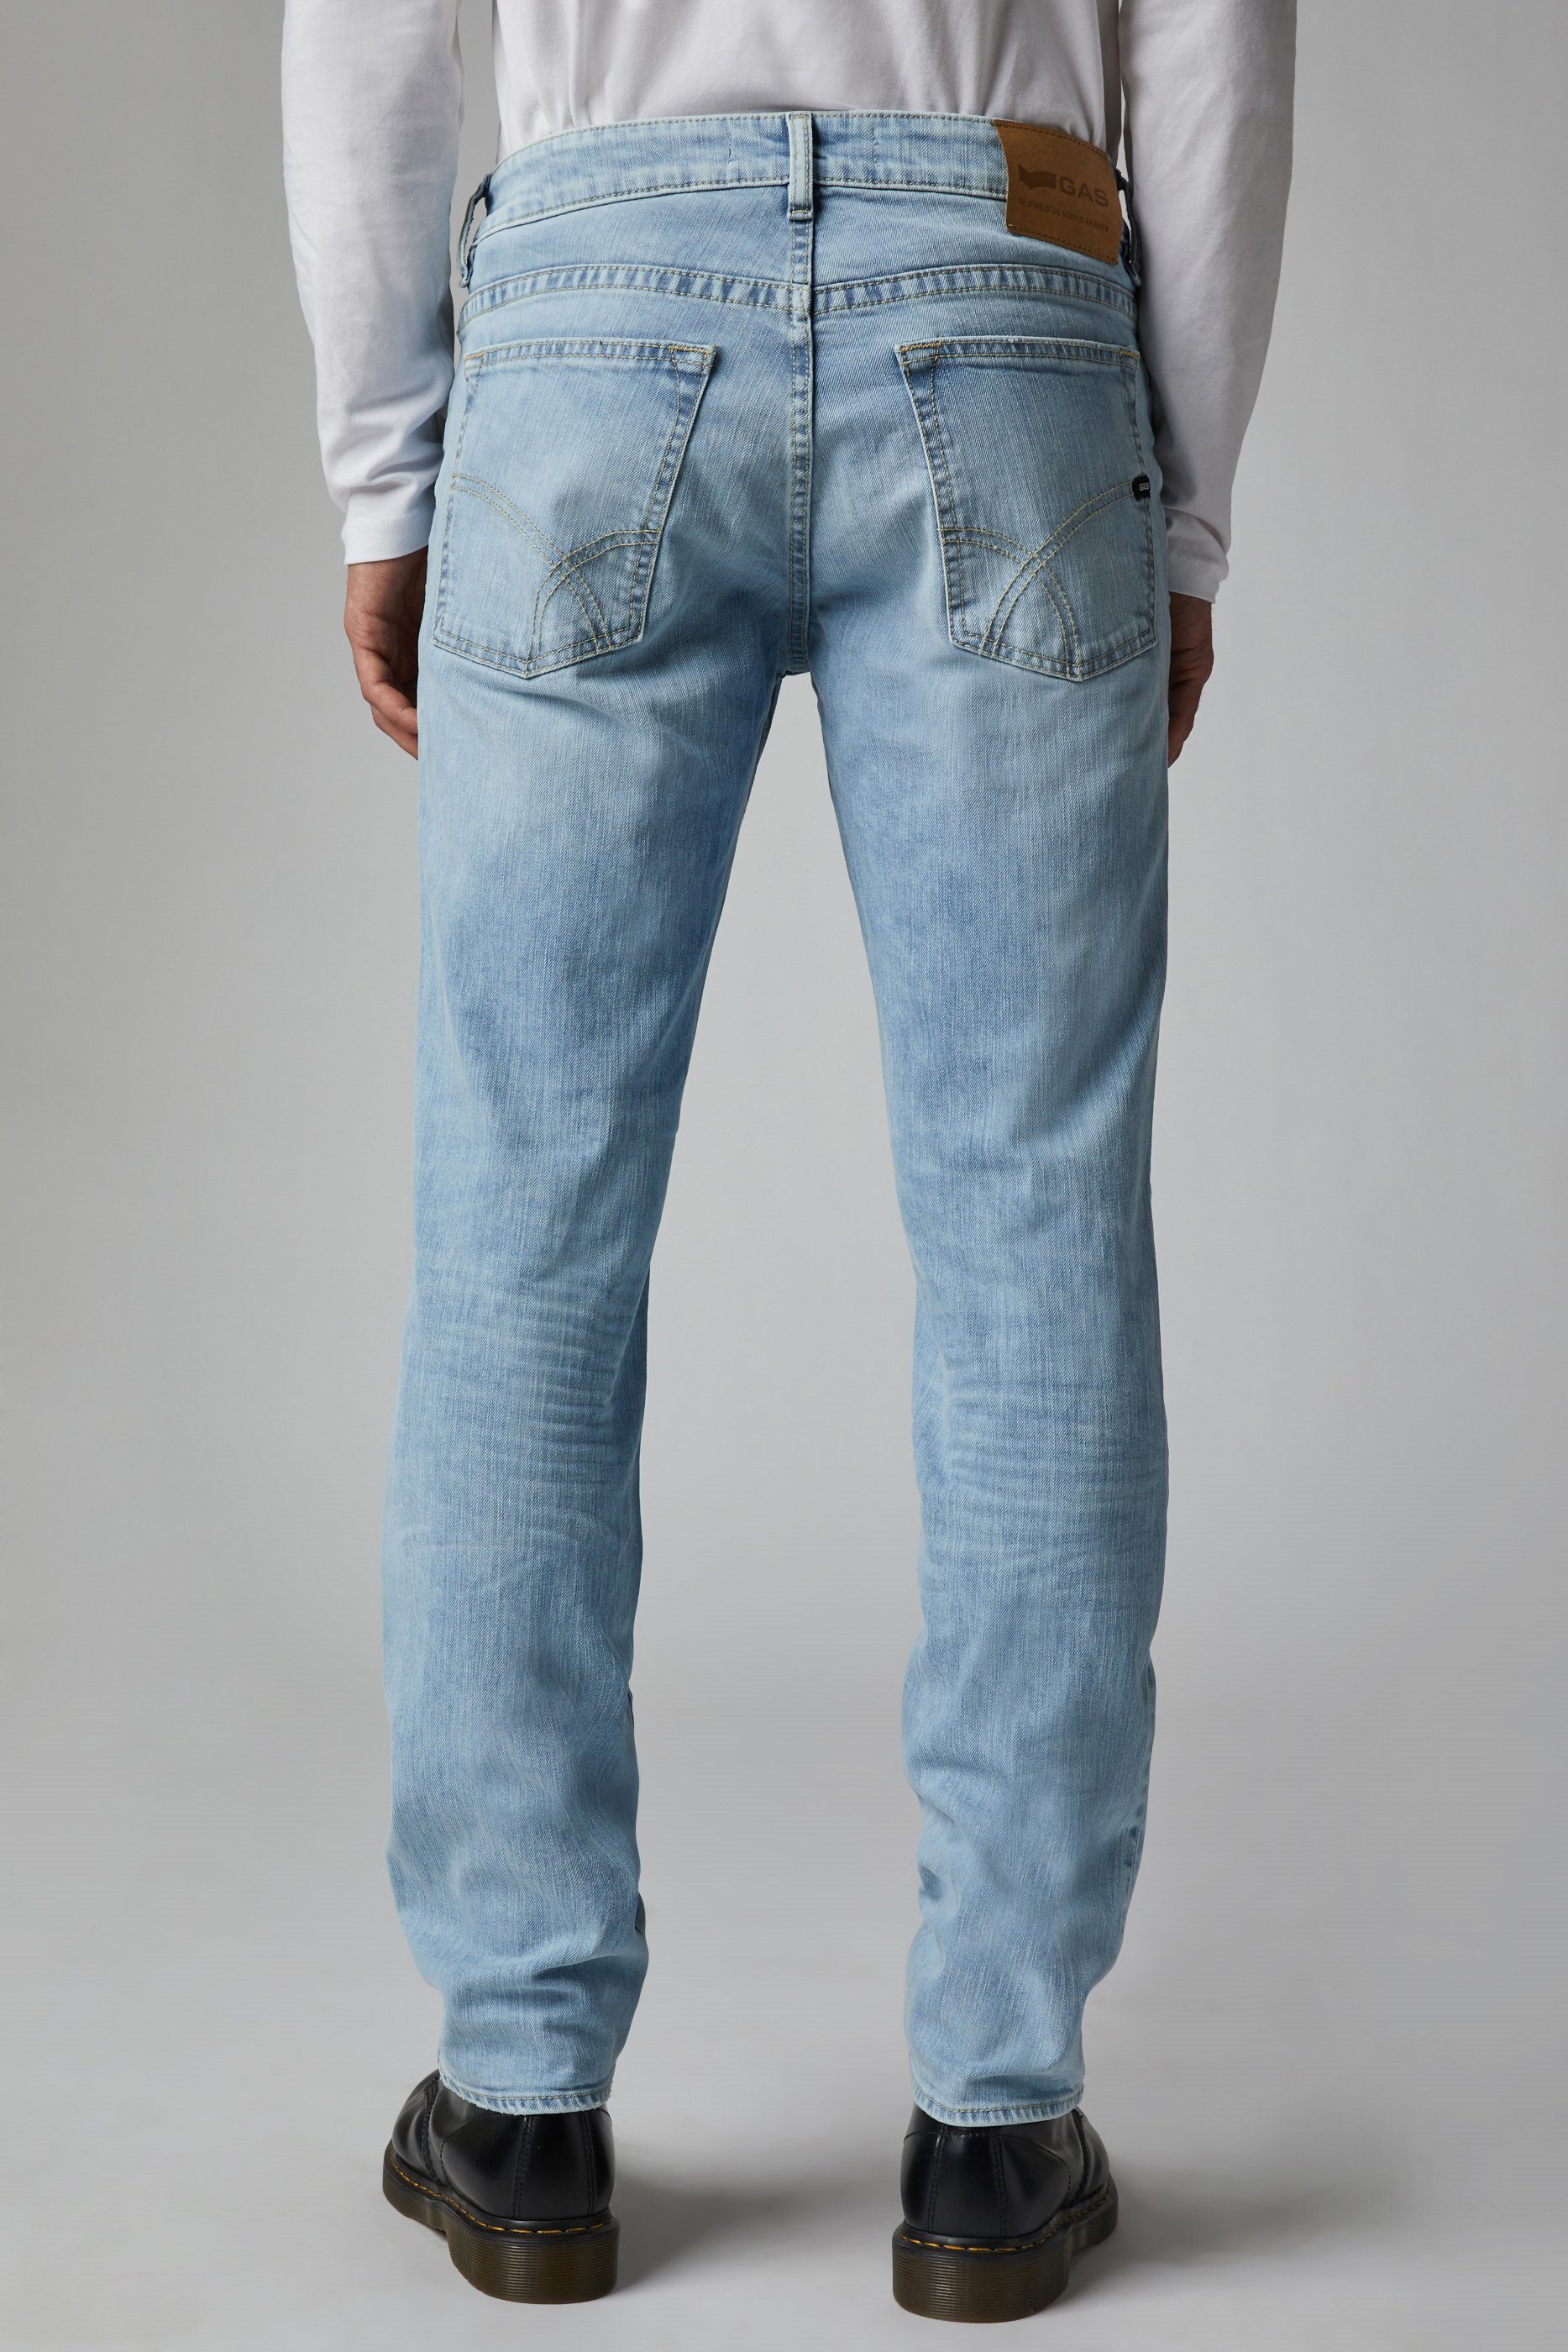 GAS Slim-fit-Jeans super Super-Bleached-Waschung mit bleach wash ANDERS